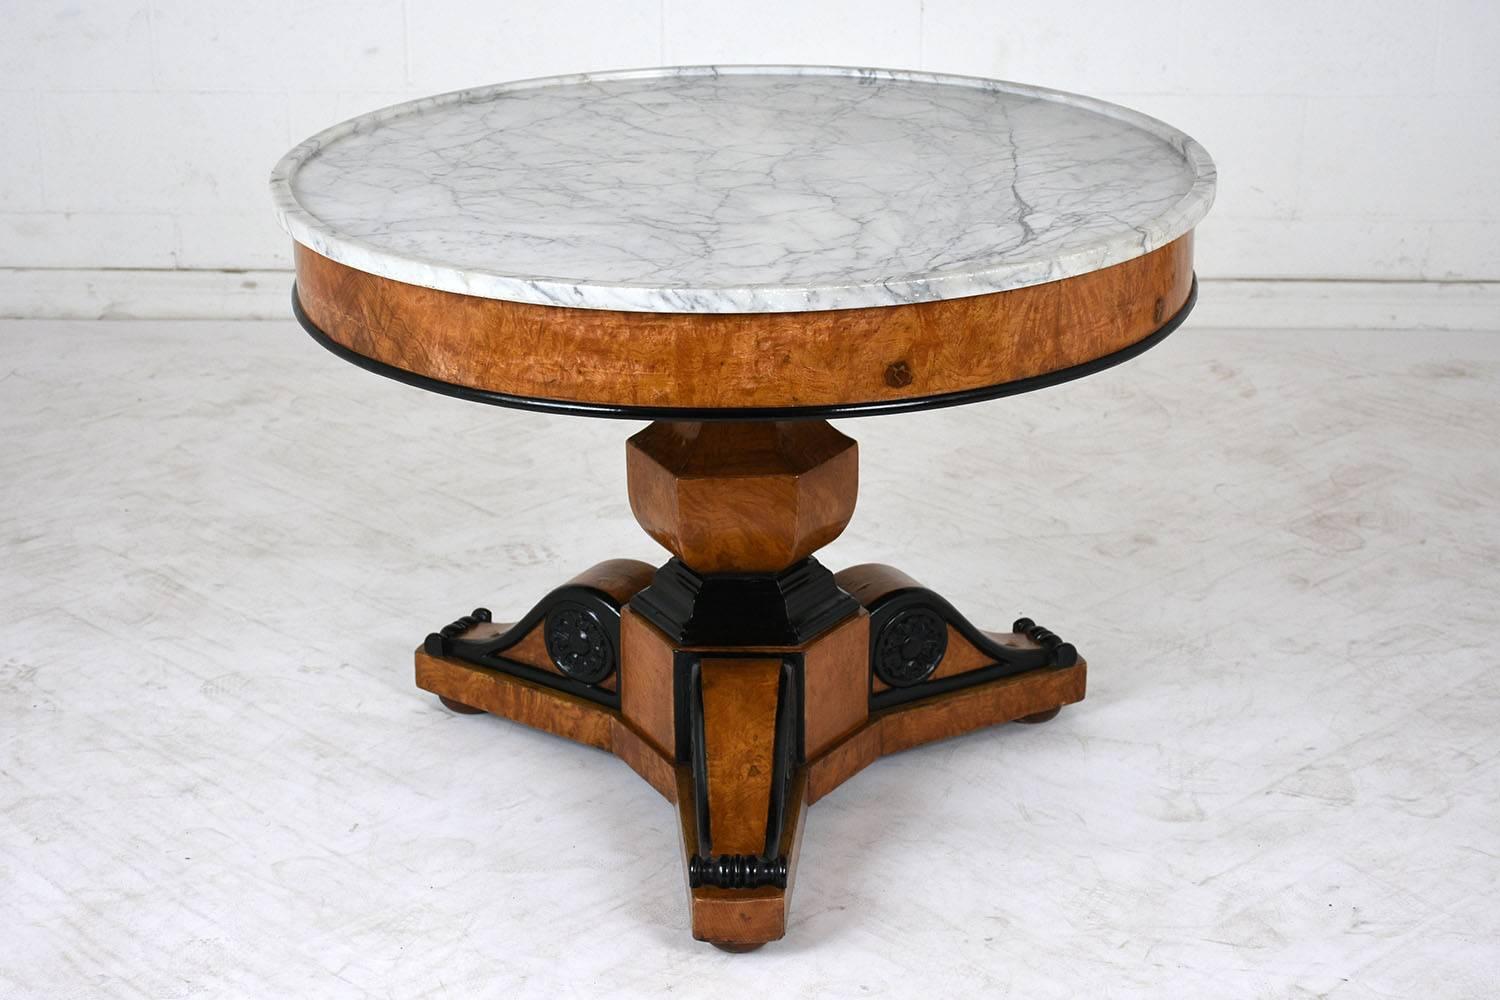 This 1850s French Empire-style round center table is made of wood covered in burl veneers stained a rich golden color with a lacquered finish. The pedestal base features a bucket shape with ornately carved legs. The legs have black accents on the